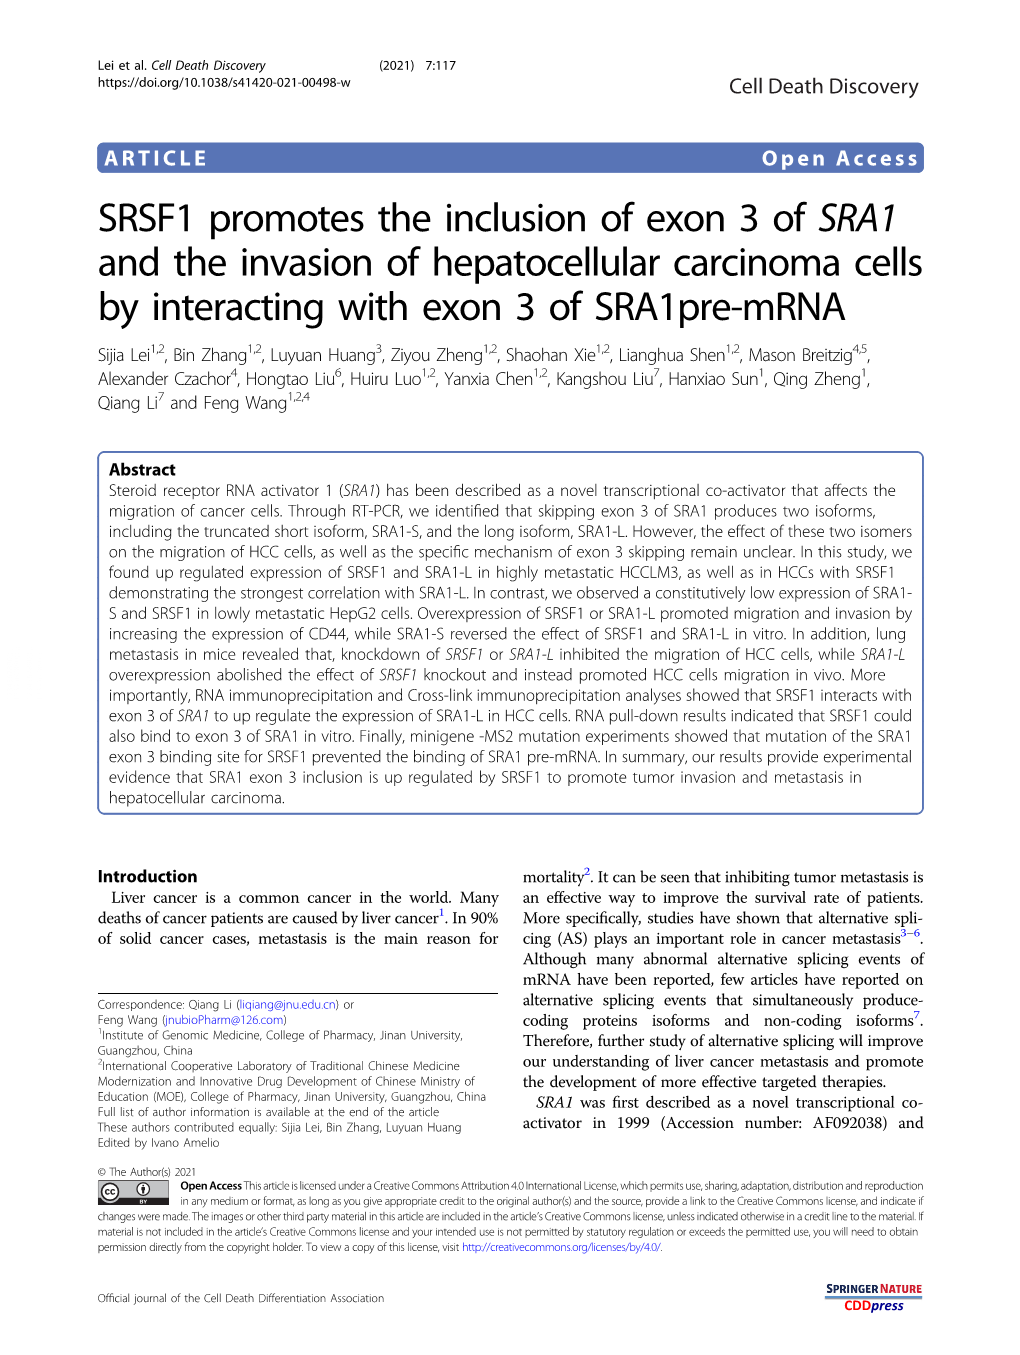 SRSF1 Promotes the Inclusion of Exon 3 of SRA1 and the Invasion Of